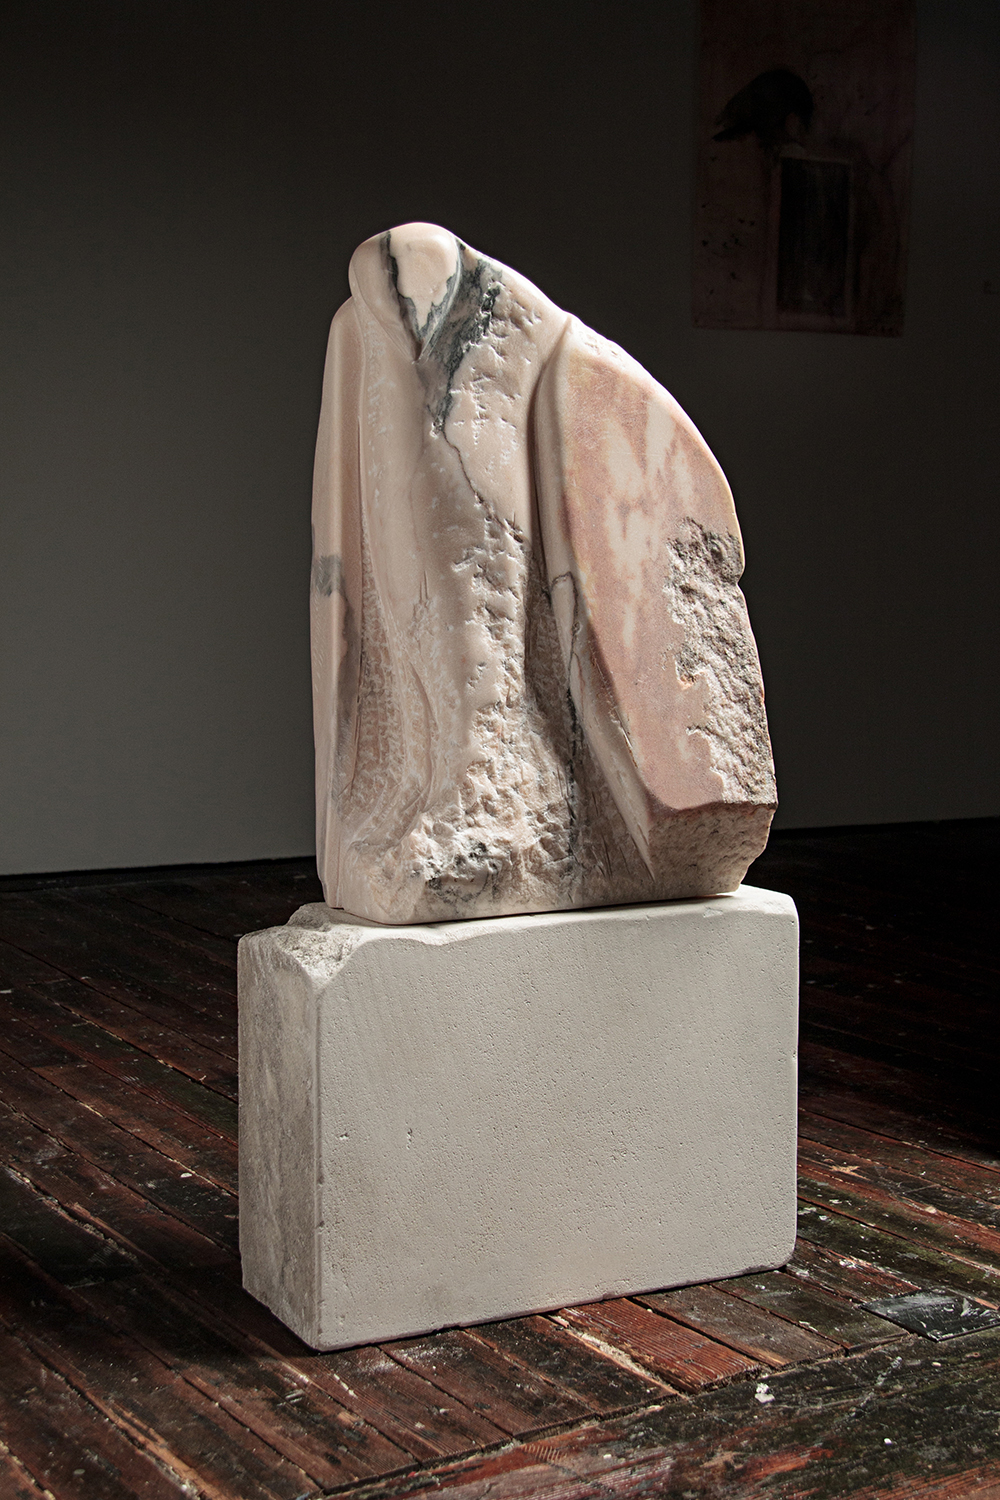  “Mantle,” 2018  Portuguese marble and limestone  39 x 20 x 8 inches 